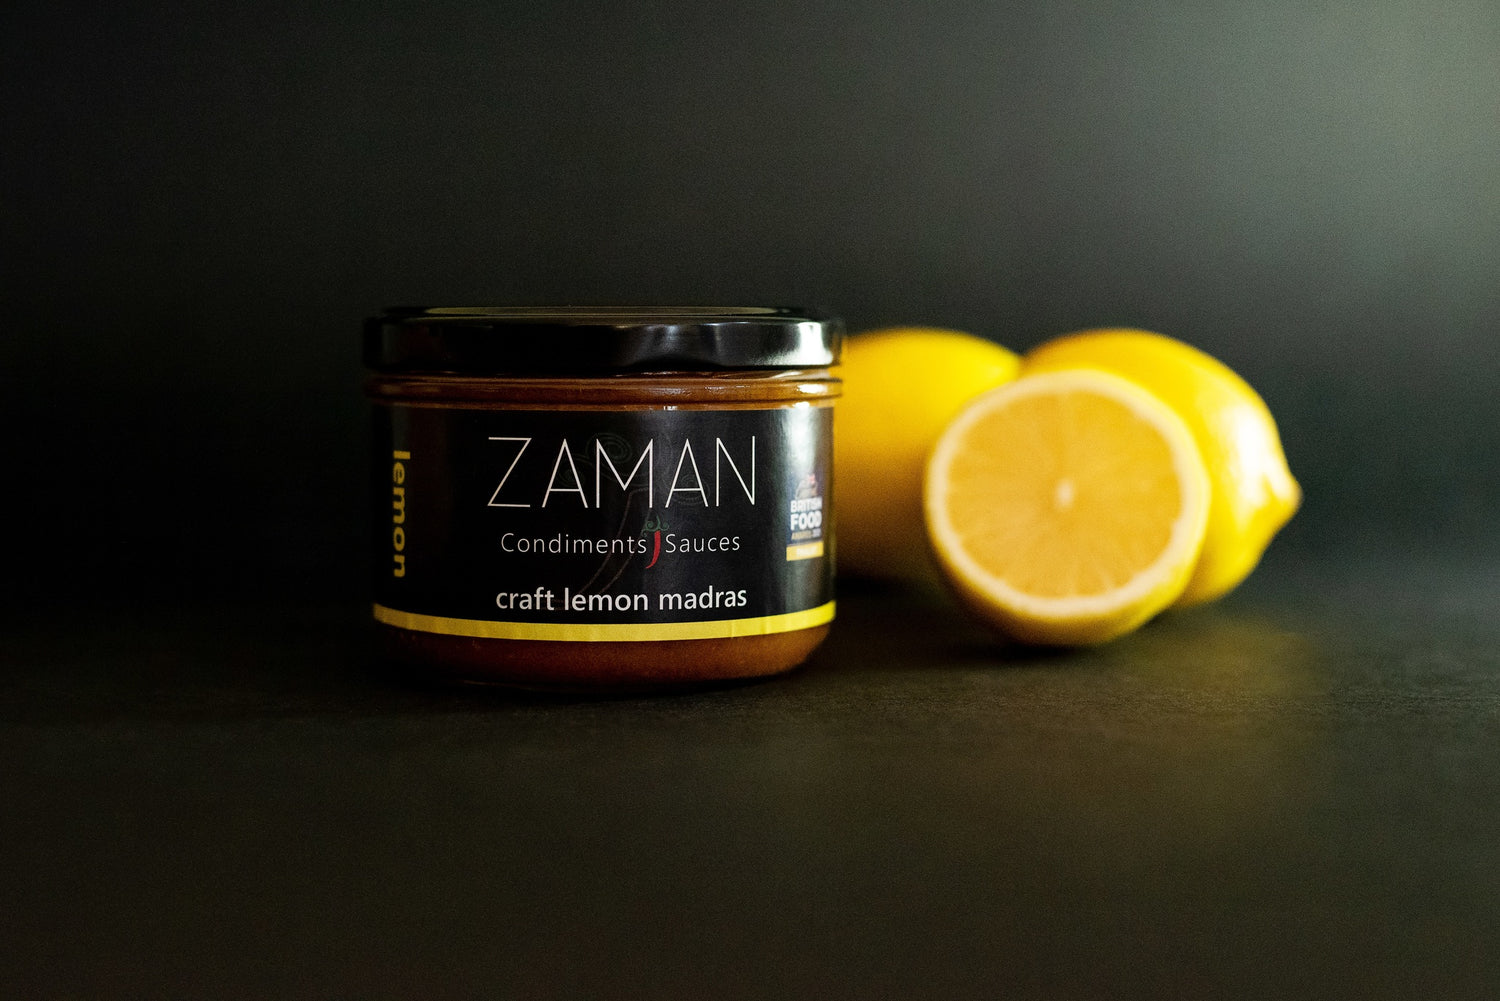 A glass jar with a black label. The label reads Zaman Condiments and Sauces and has a little red chilli in between the words condiments and sauces. The background is dark and there are 3 yellow lemons next to the jar.. The label reads craft lemon madras and there is the word lemon written vertically in yellow on the left of the label.